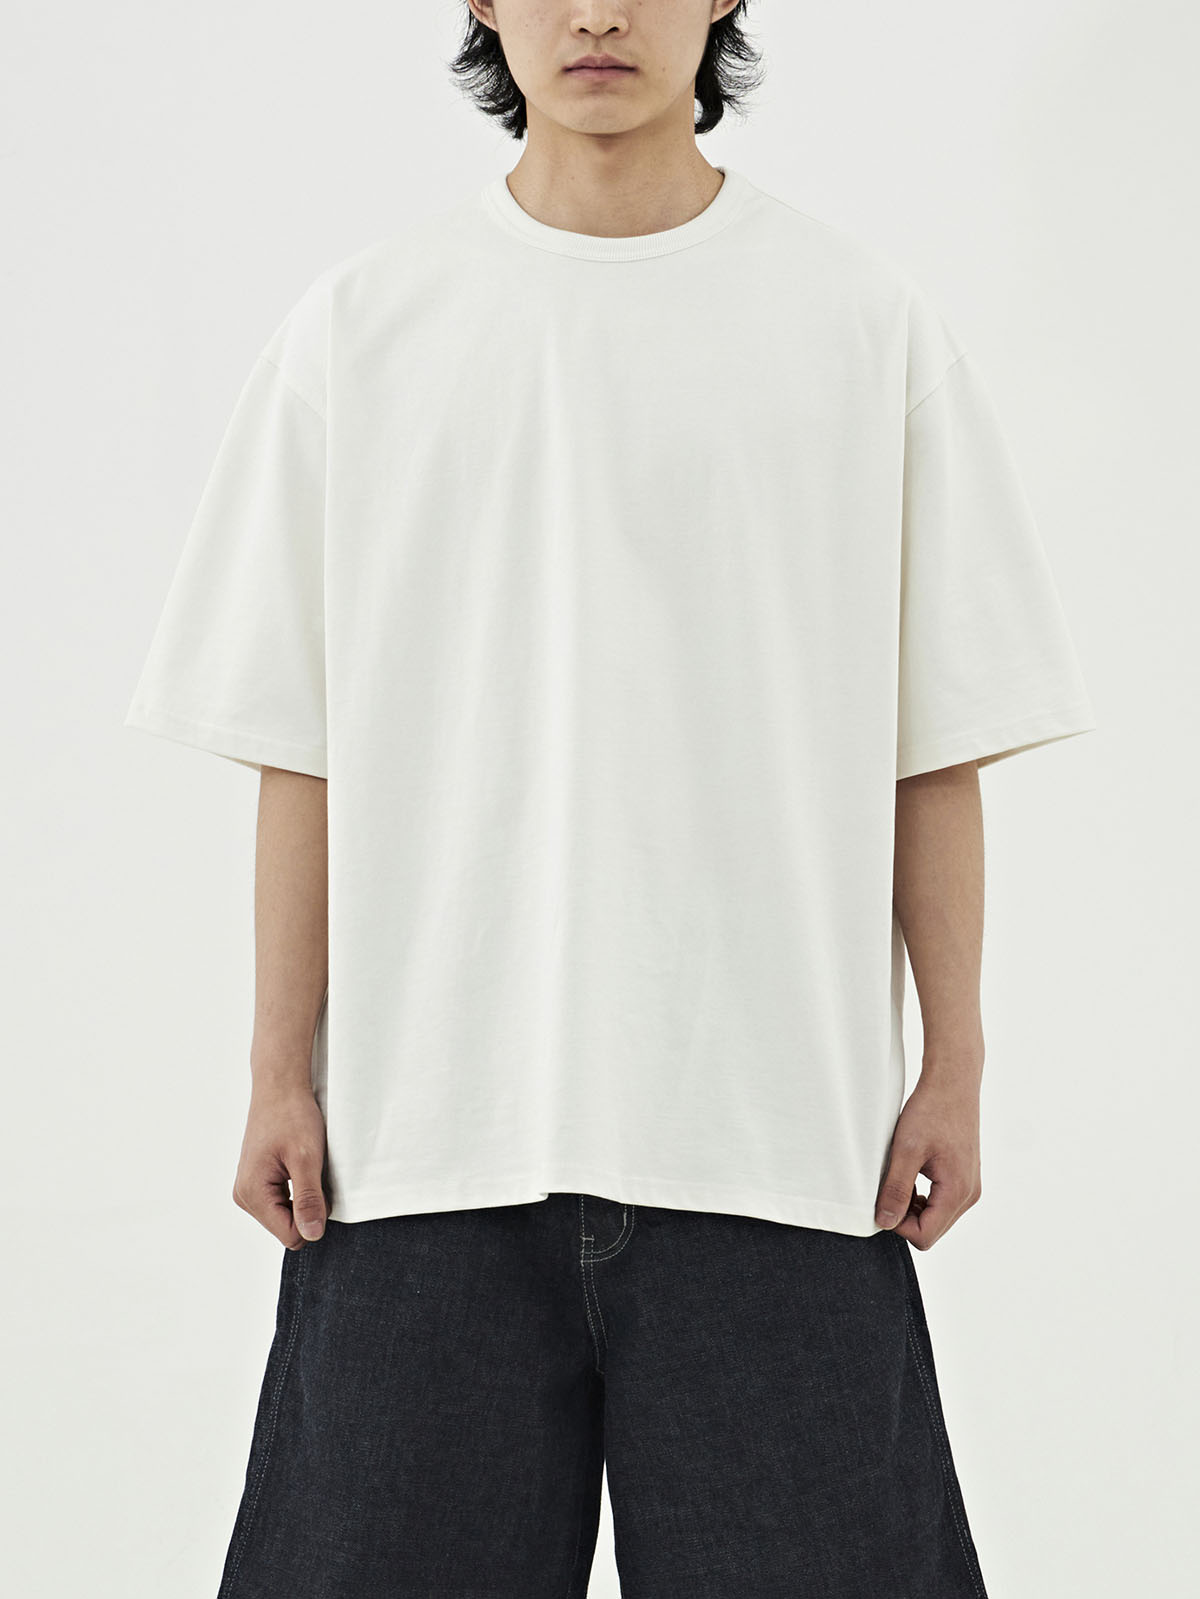 WIDE S/S T-SHIRT (OFF WHITE)